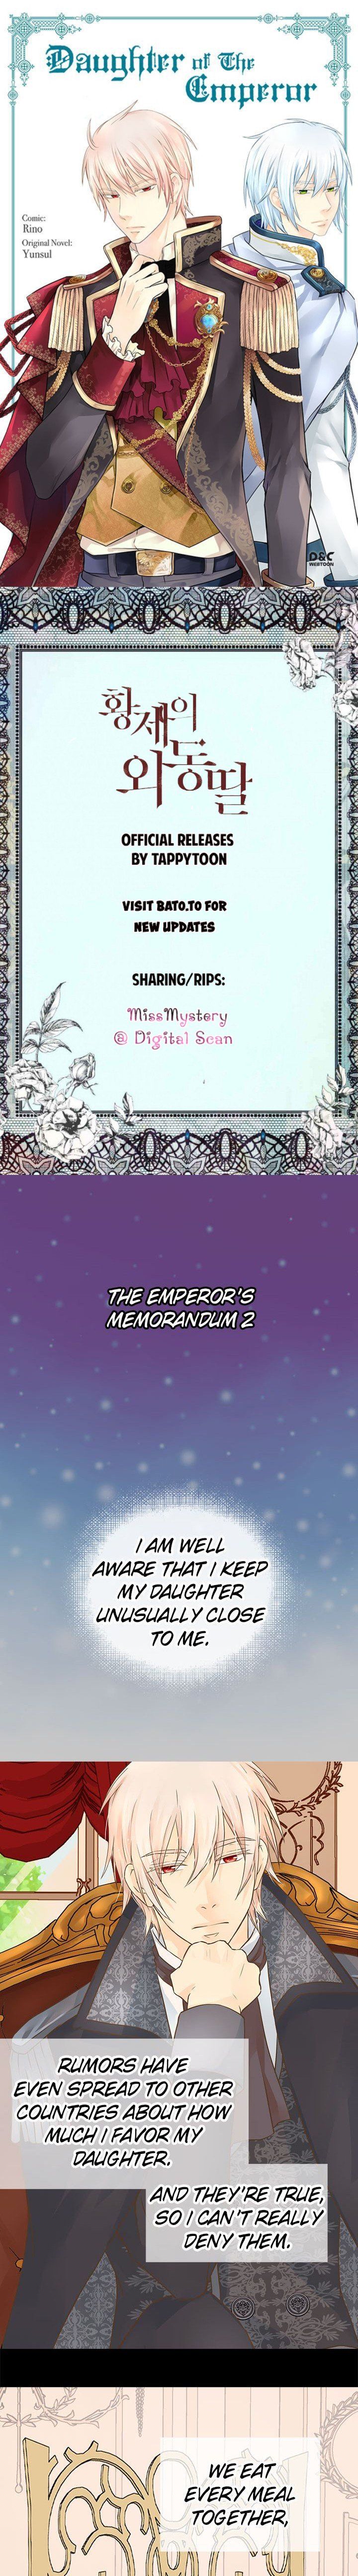 Daughter of the Emperor Chapter 115 page 1